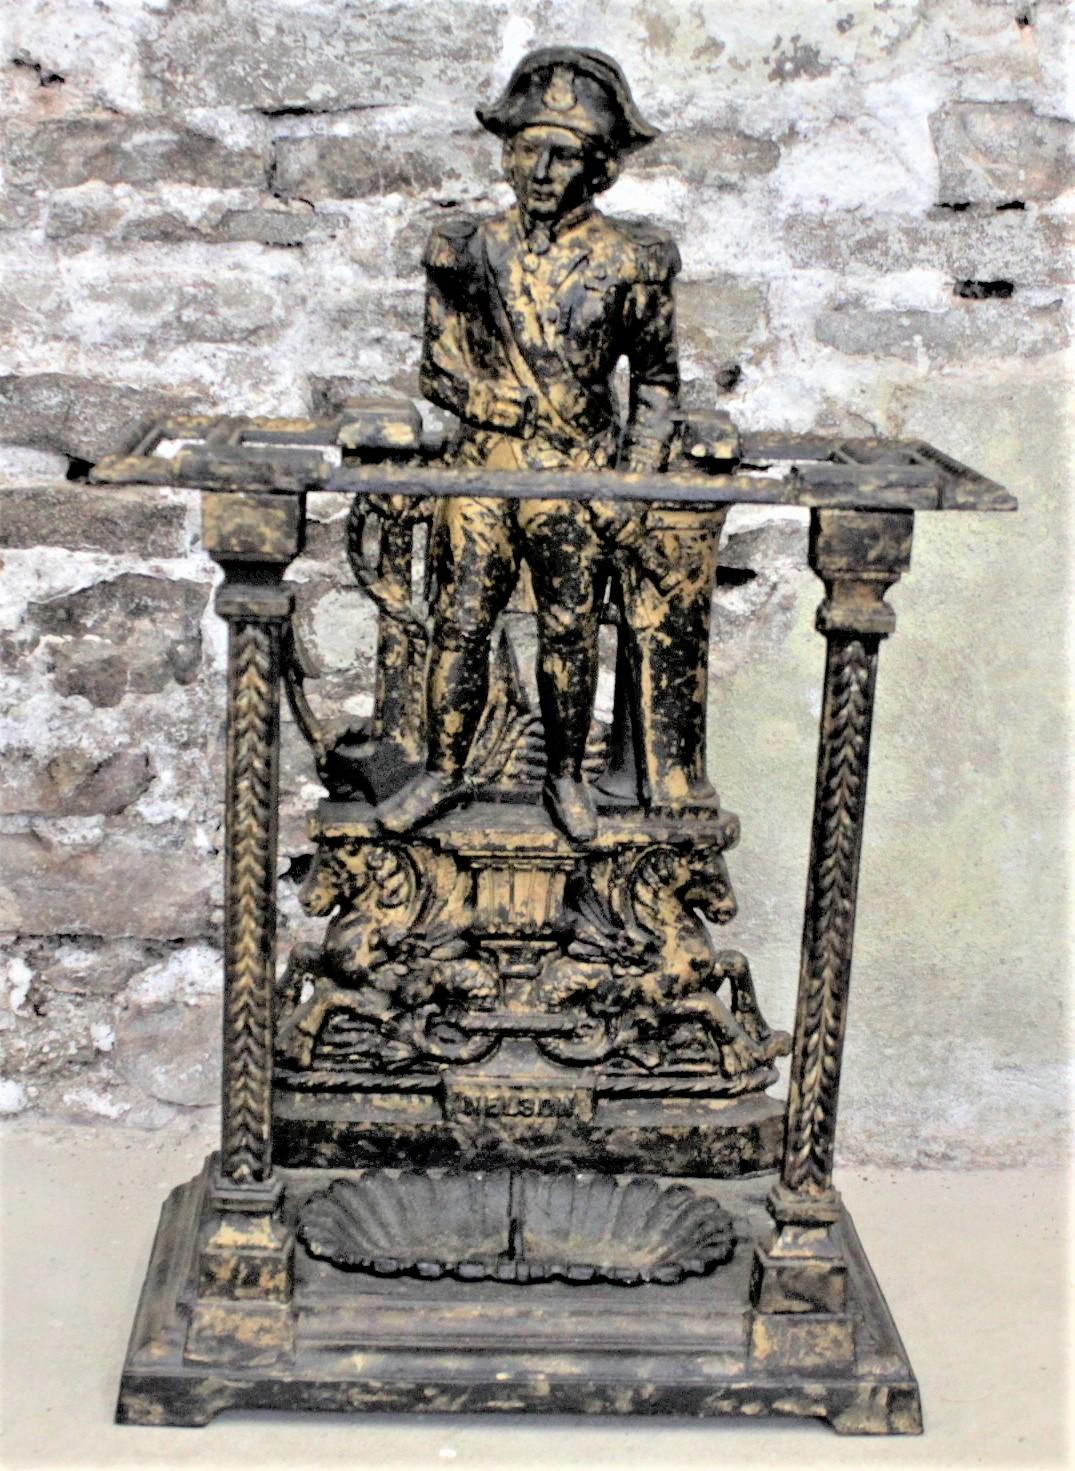 This antique cast iron umbrella or walking stick stand is unsigned, but presumed to have been made in England in circa 1880 in the period Victorian style. The ornate casting of this umbrella stand features a figural representation of Admiral Lord